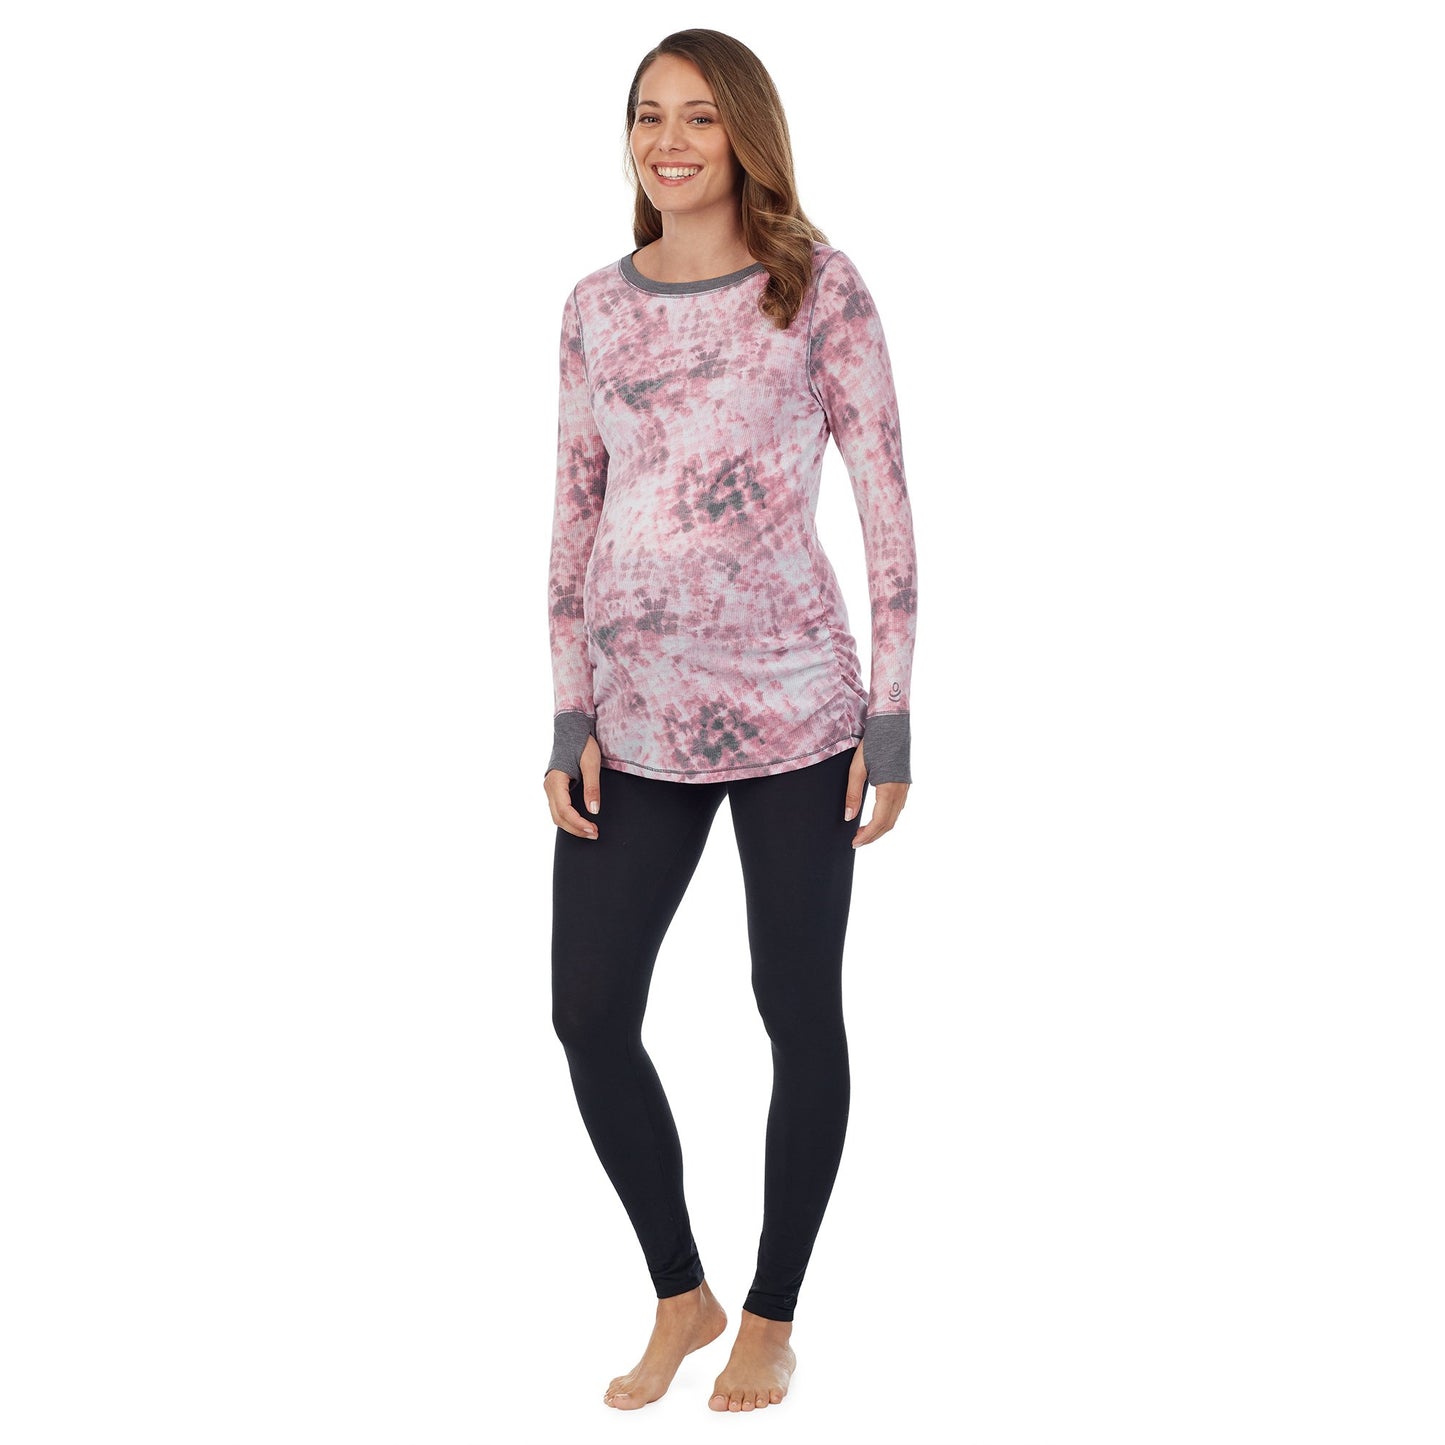 Pink Tie Dye;Model is wearing a size S. She is 5’10”, Bust 34”, Waist 34”, Hips 40”. #Model is wearing a maternity bump.@ A lady wearingStretch Thermal Maternity Long Sleeve Ballet Neck Top with Pink Tie Dye print